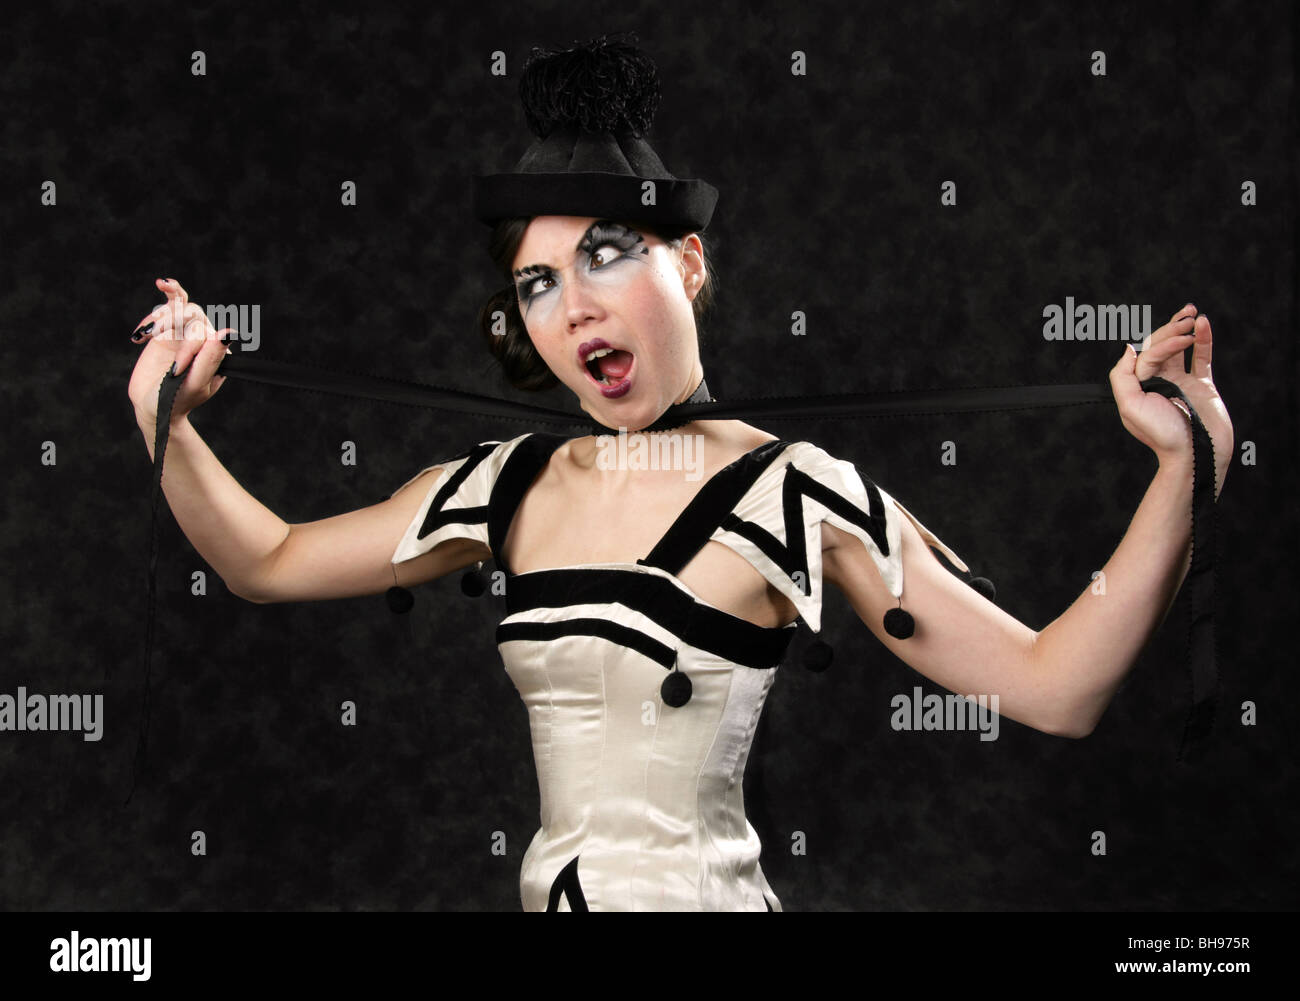 Comedy Burlesque Performer Pretending to Strangle Herself and Making a Funny Face Stock Photo